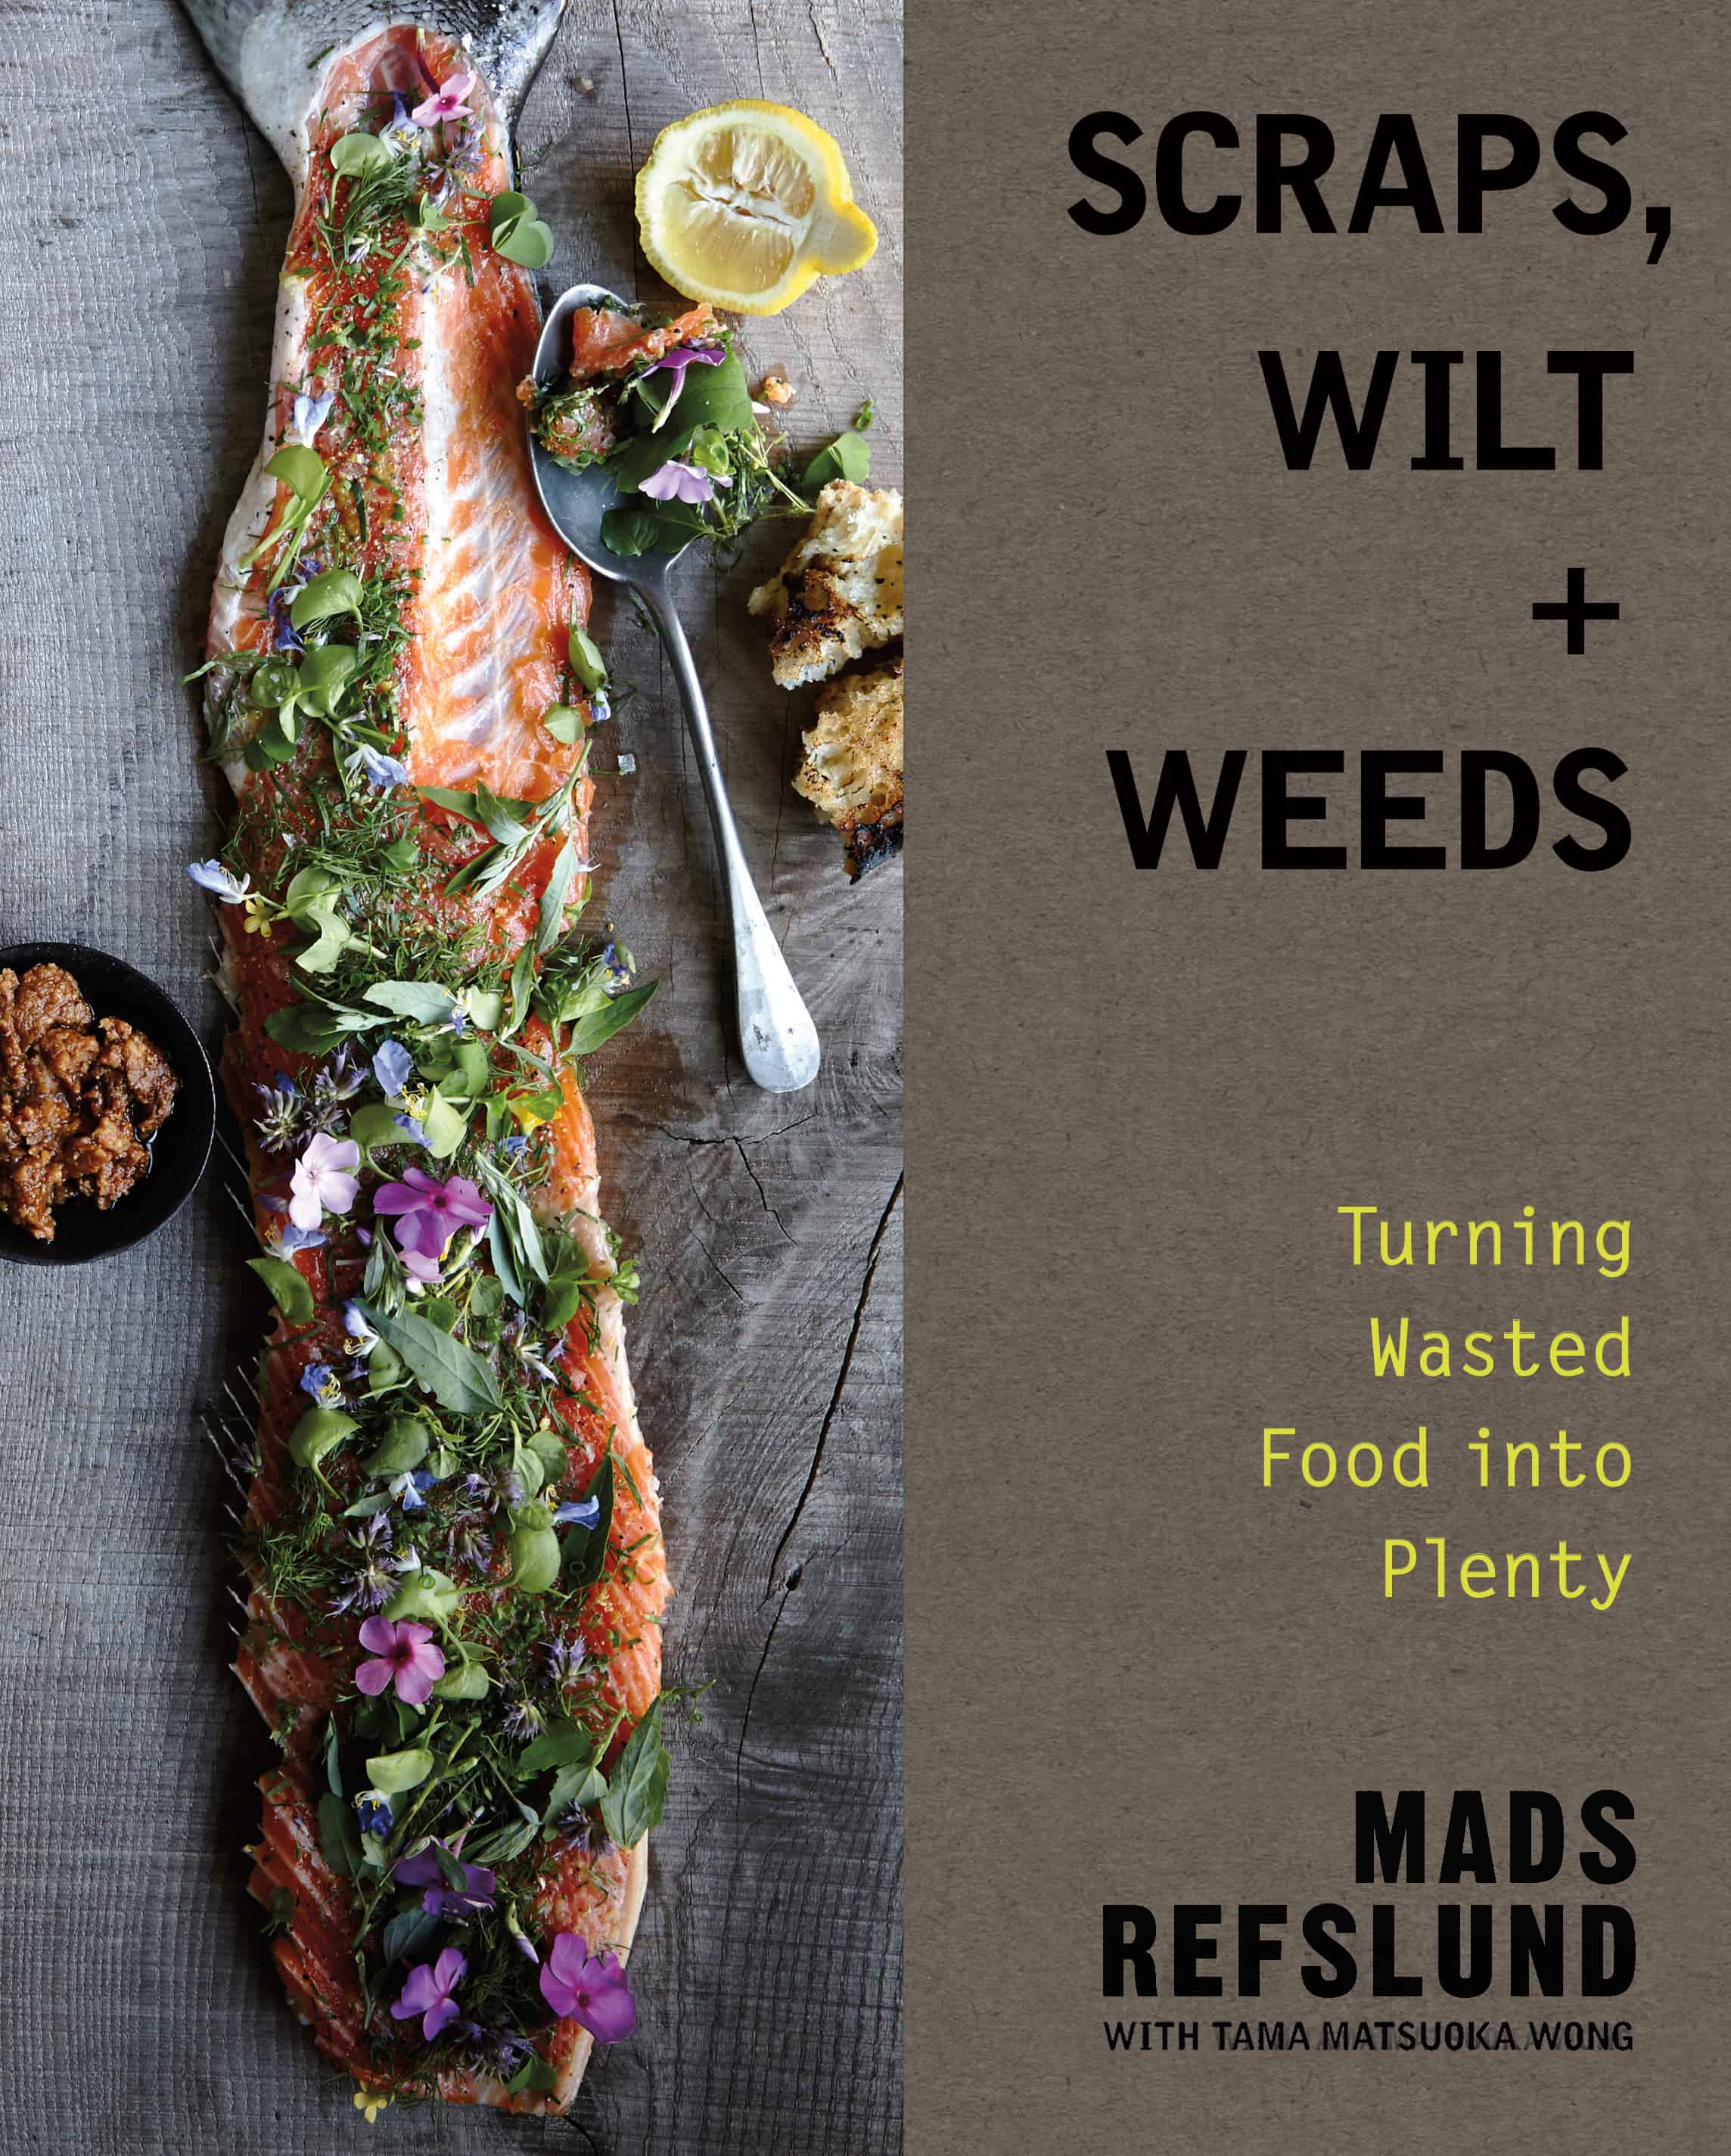 Scraps, Wilt and Weeds: Turning Food Waste into Plenty was published in March 2017.